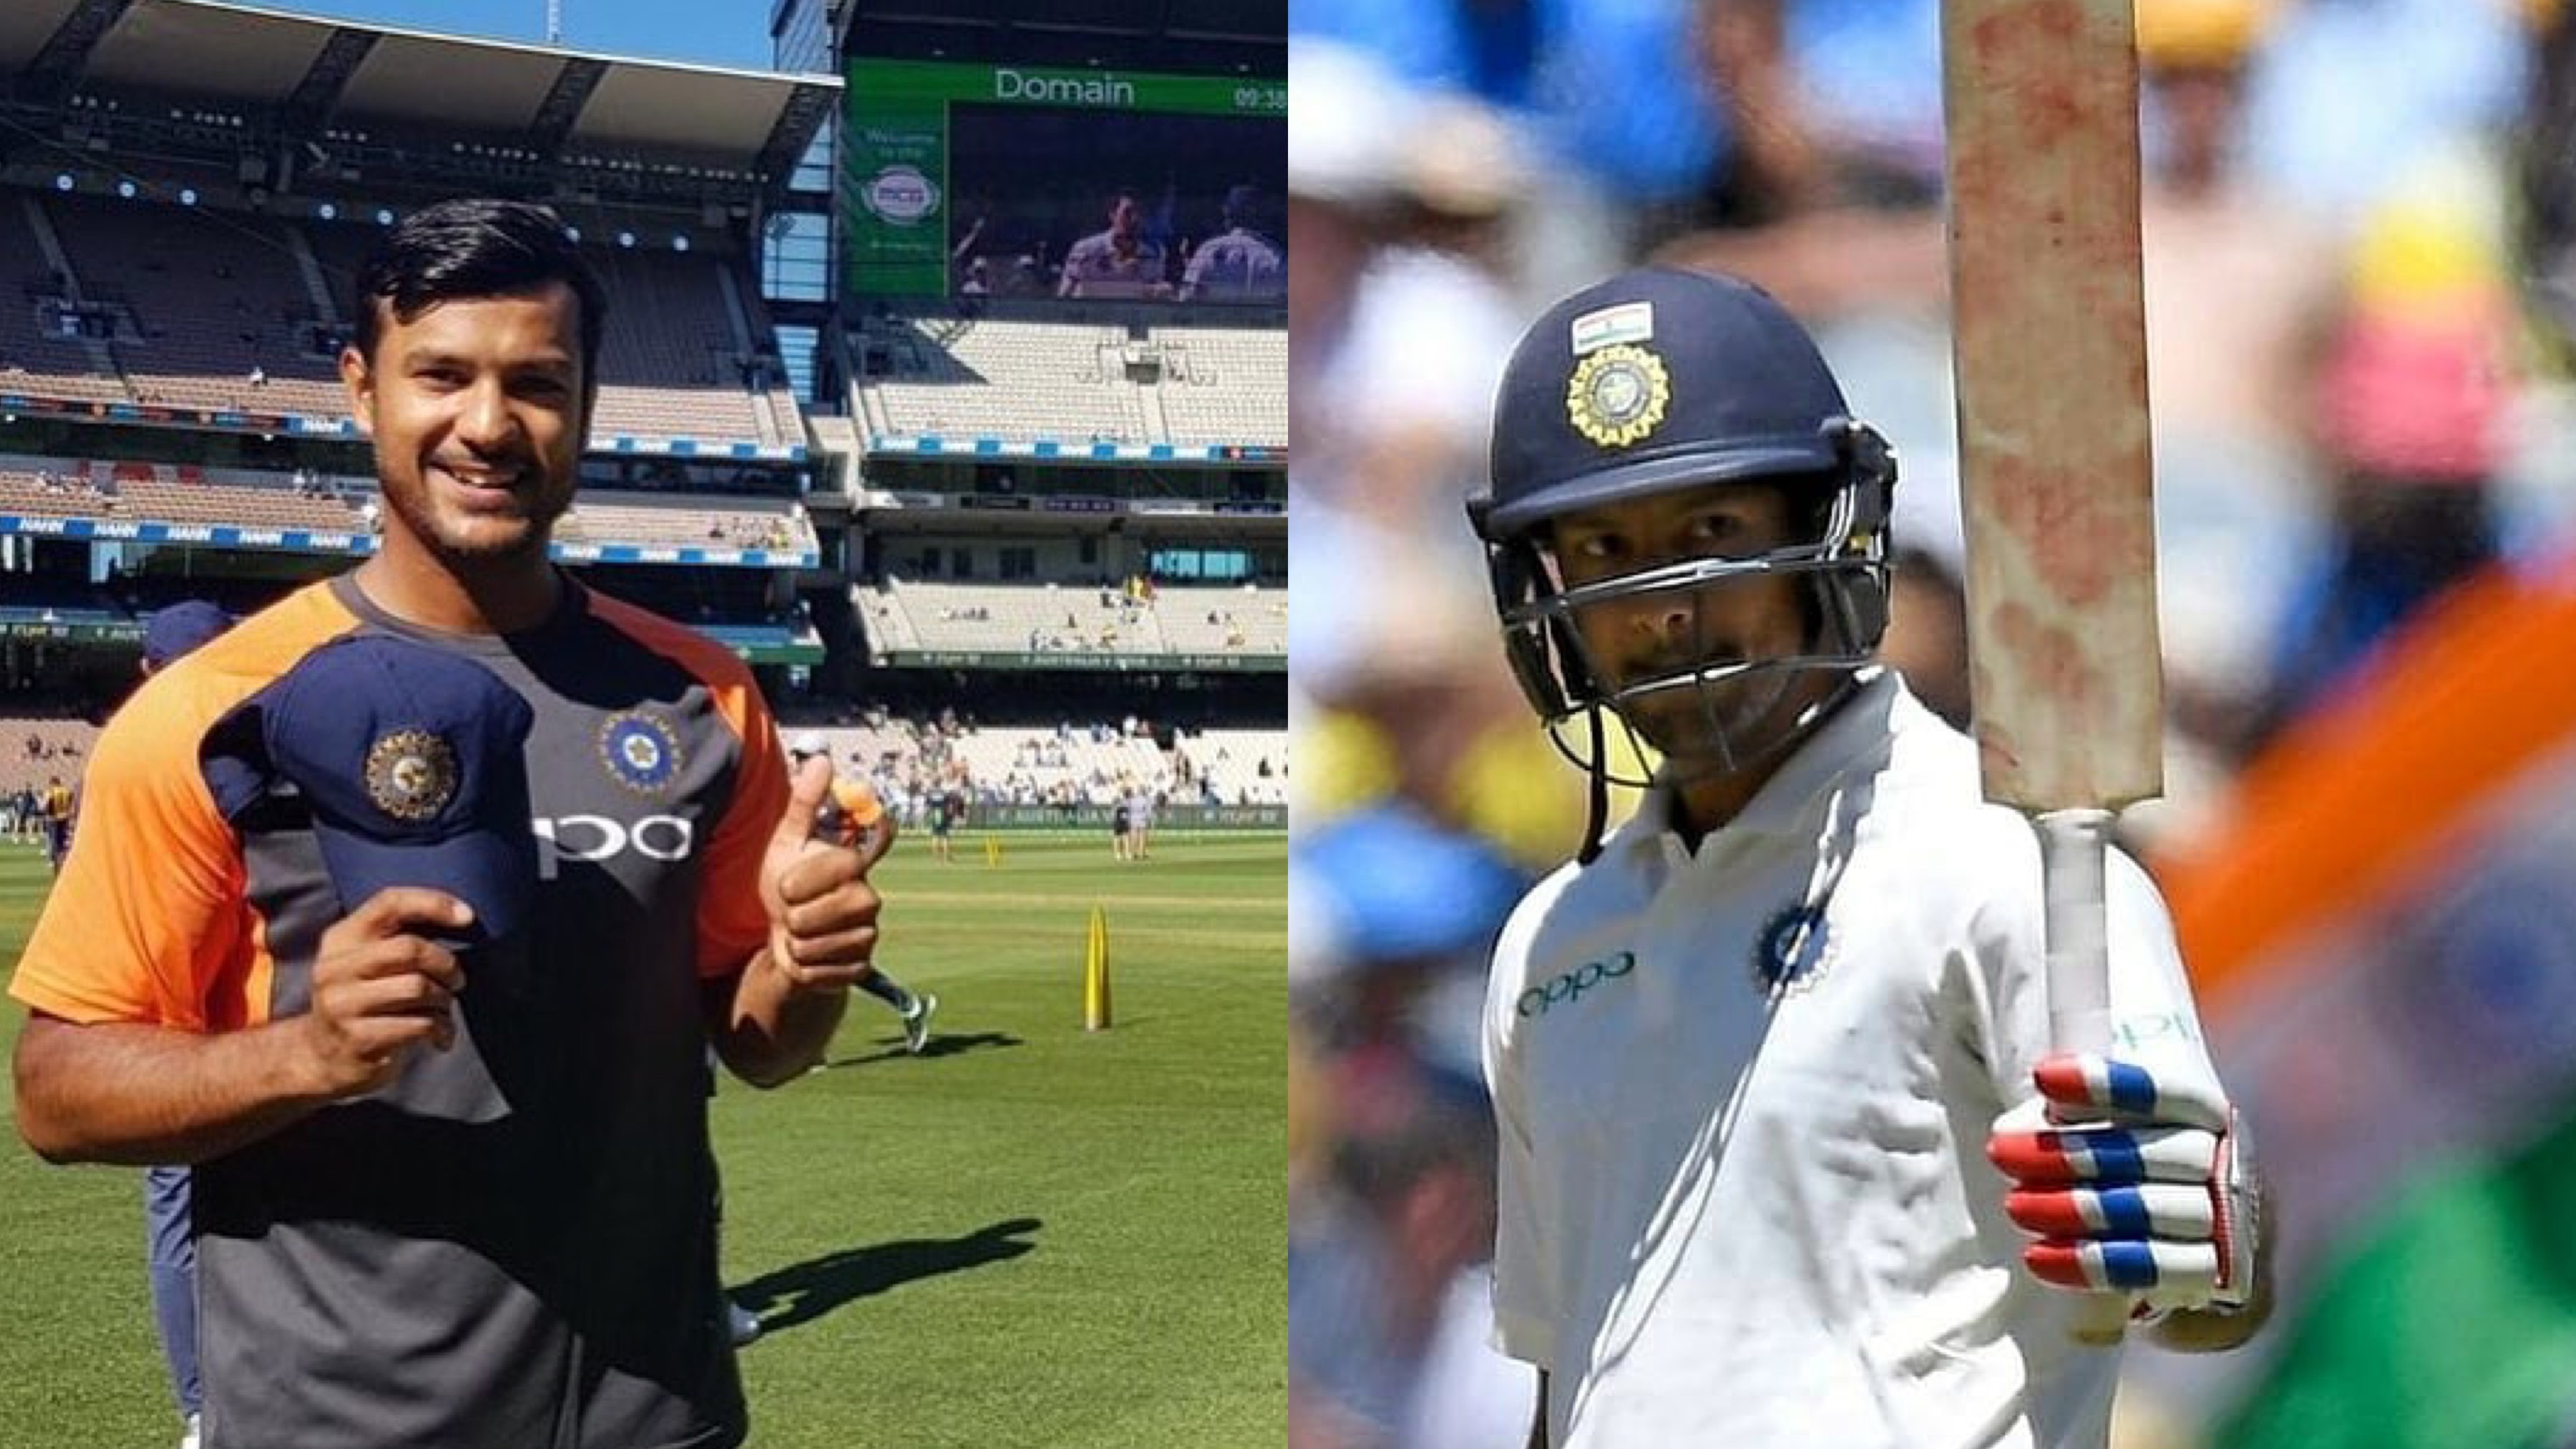 AUS v IND 2020-21: Mayank Agarwal recalls his Test debut at MCG on Boxing Day against Australia